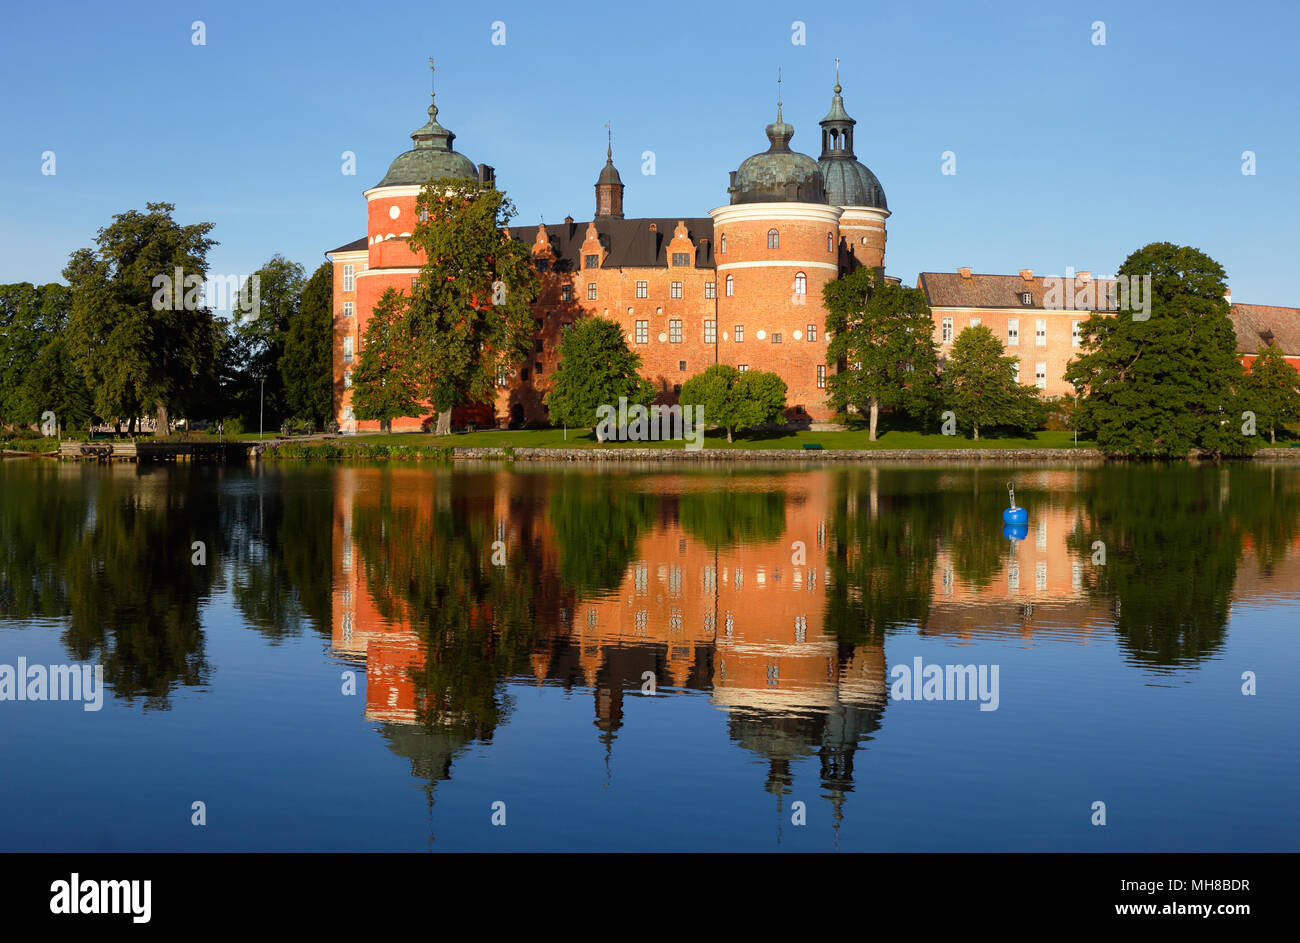 The royal Gripsholm castle located in Mariefred in the Province of Sodermanland, Sweden, mirrored in the water. Construction started1537 and was compl Stock Photo